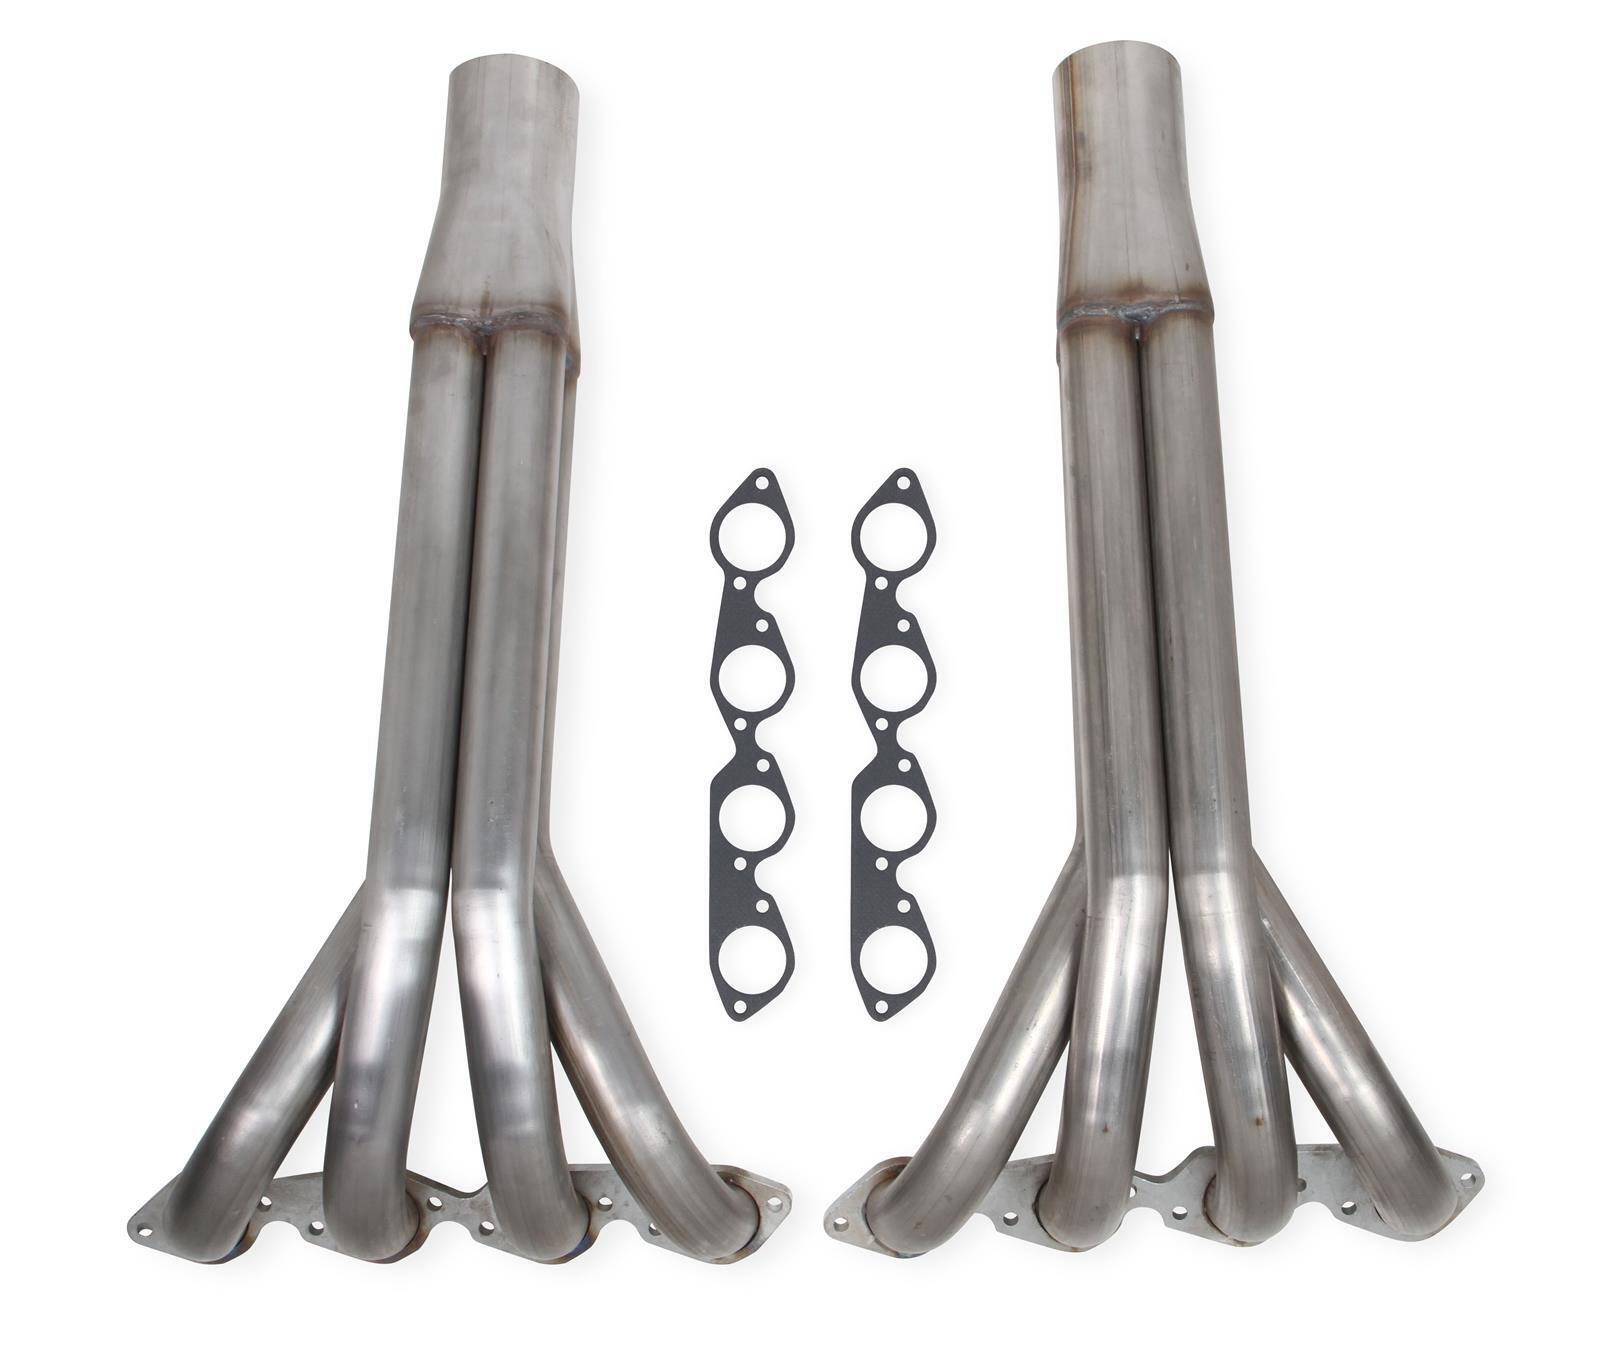 Flowtech 11551FLT Headers Upsweep 4x4 Stainless Steel Natural 2 43834 in.